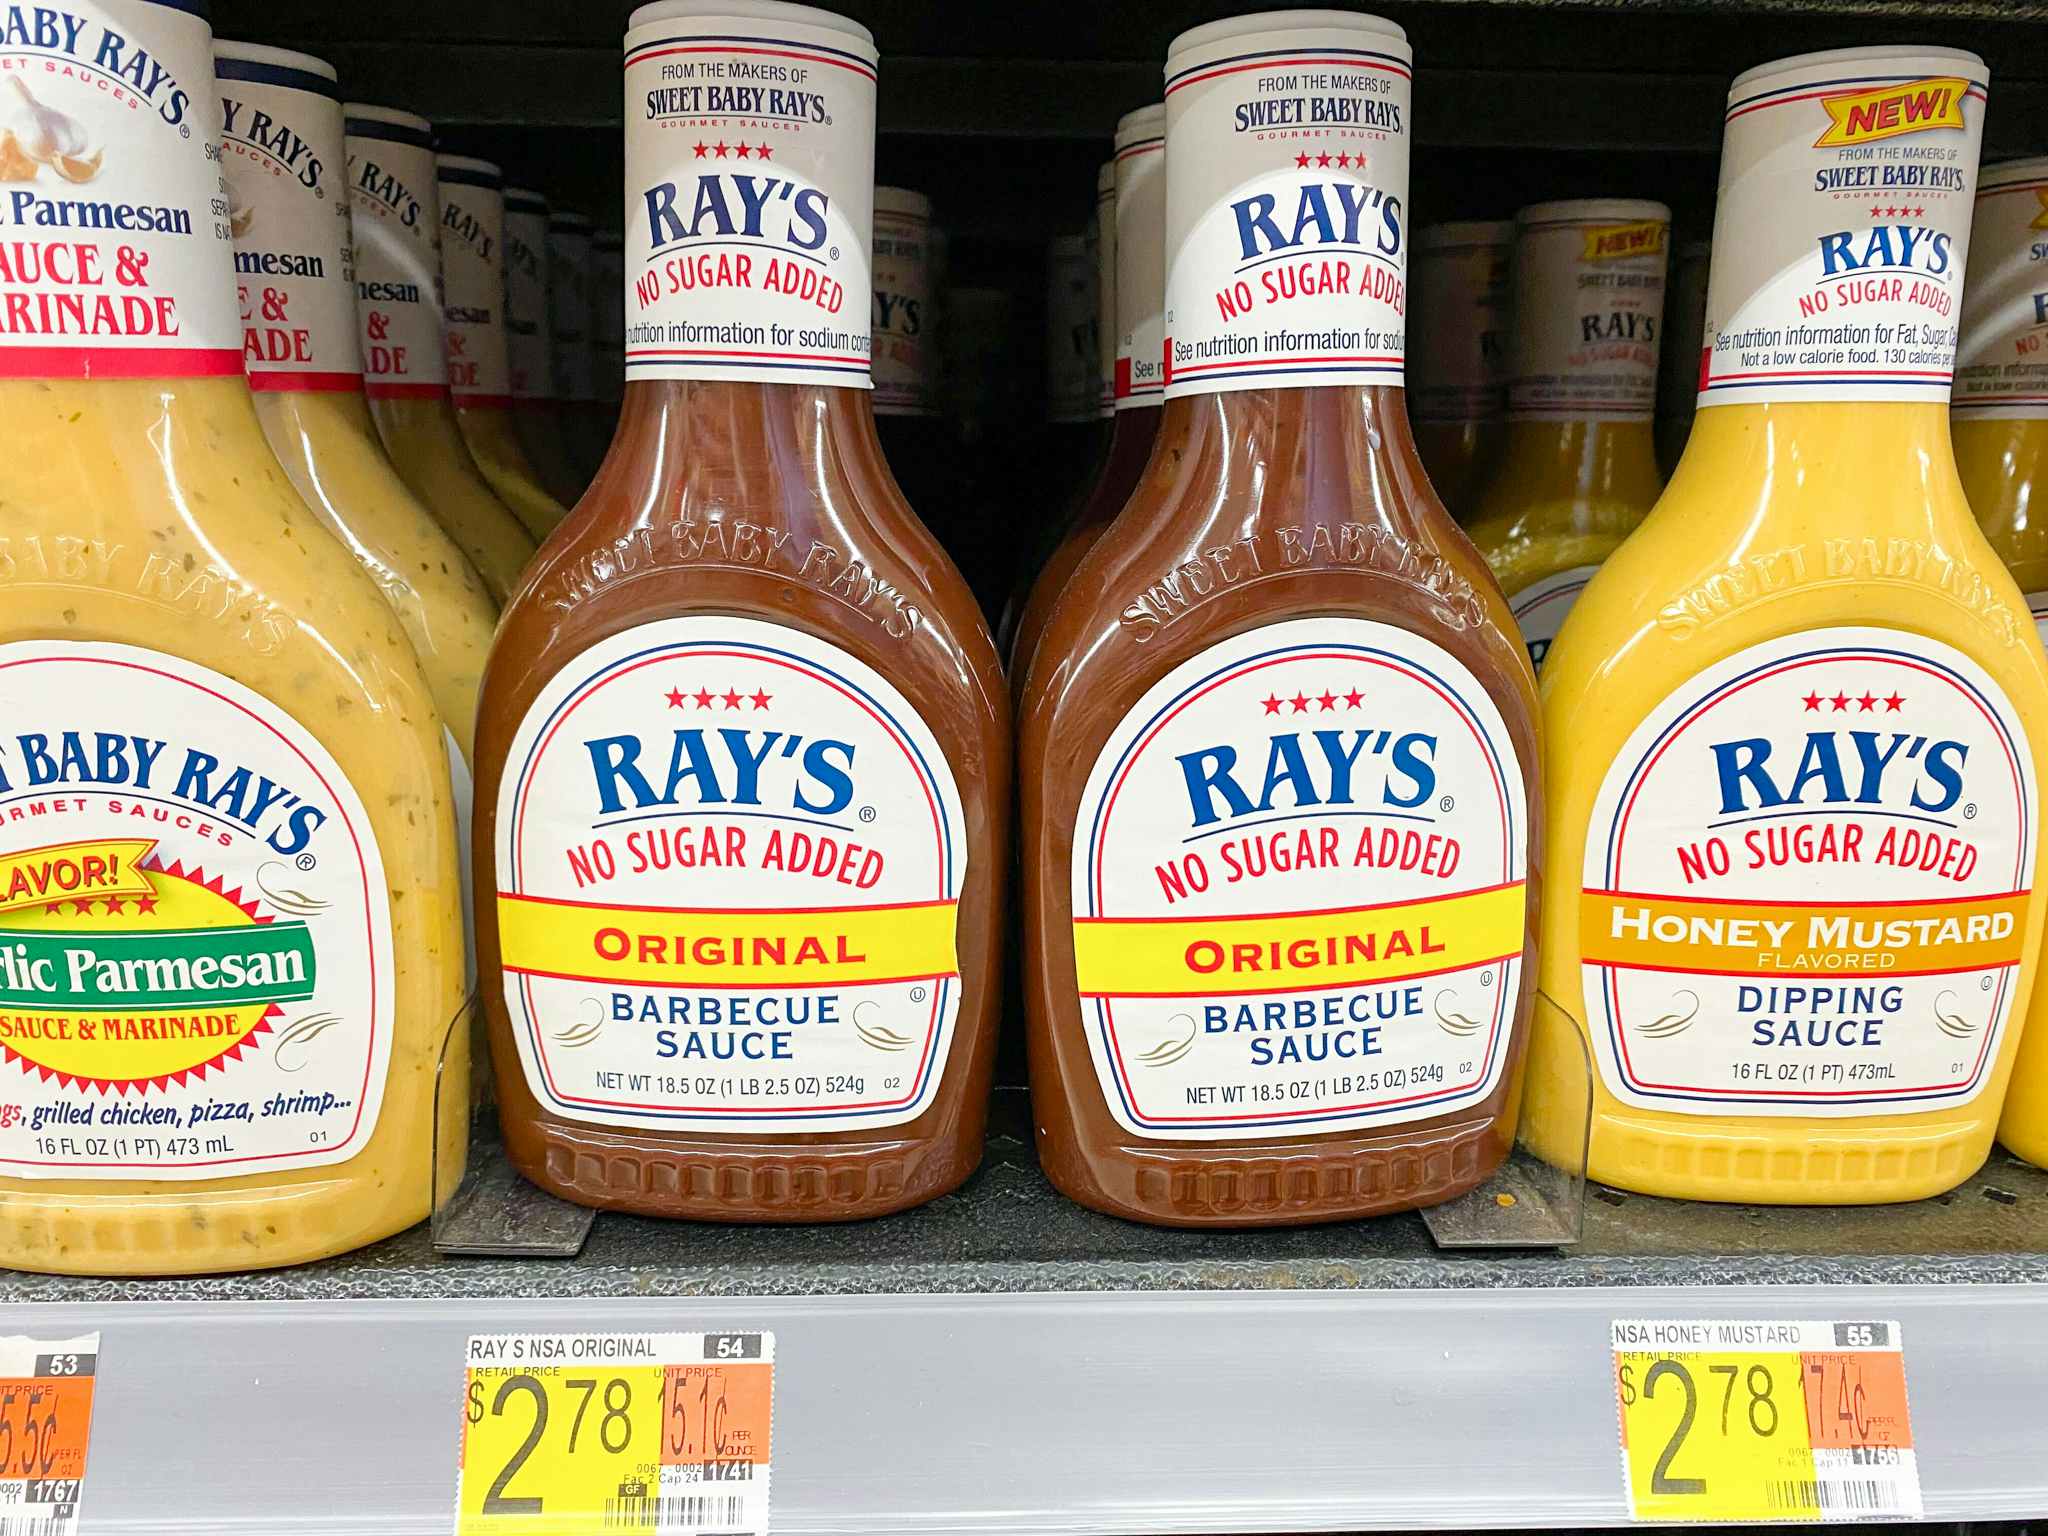 Ray's No Sugar Added Barbecue Suace on shelf at Walmart. The price on the shelf indicates the product is $2.78.